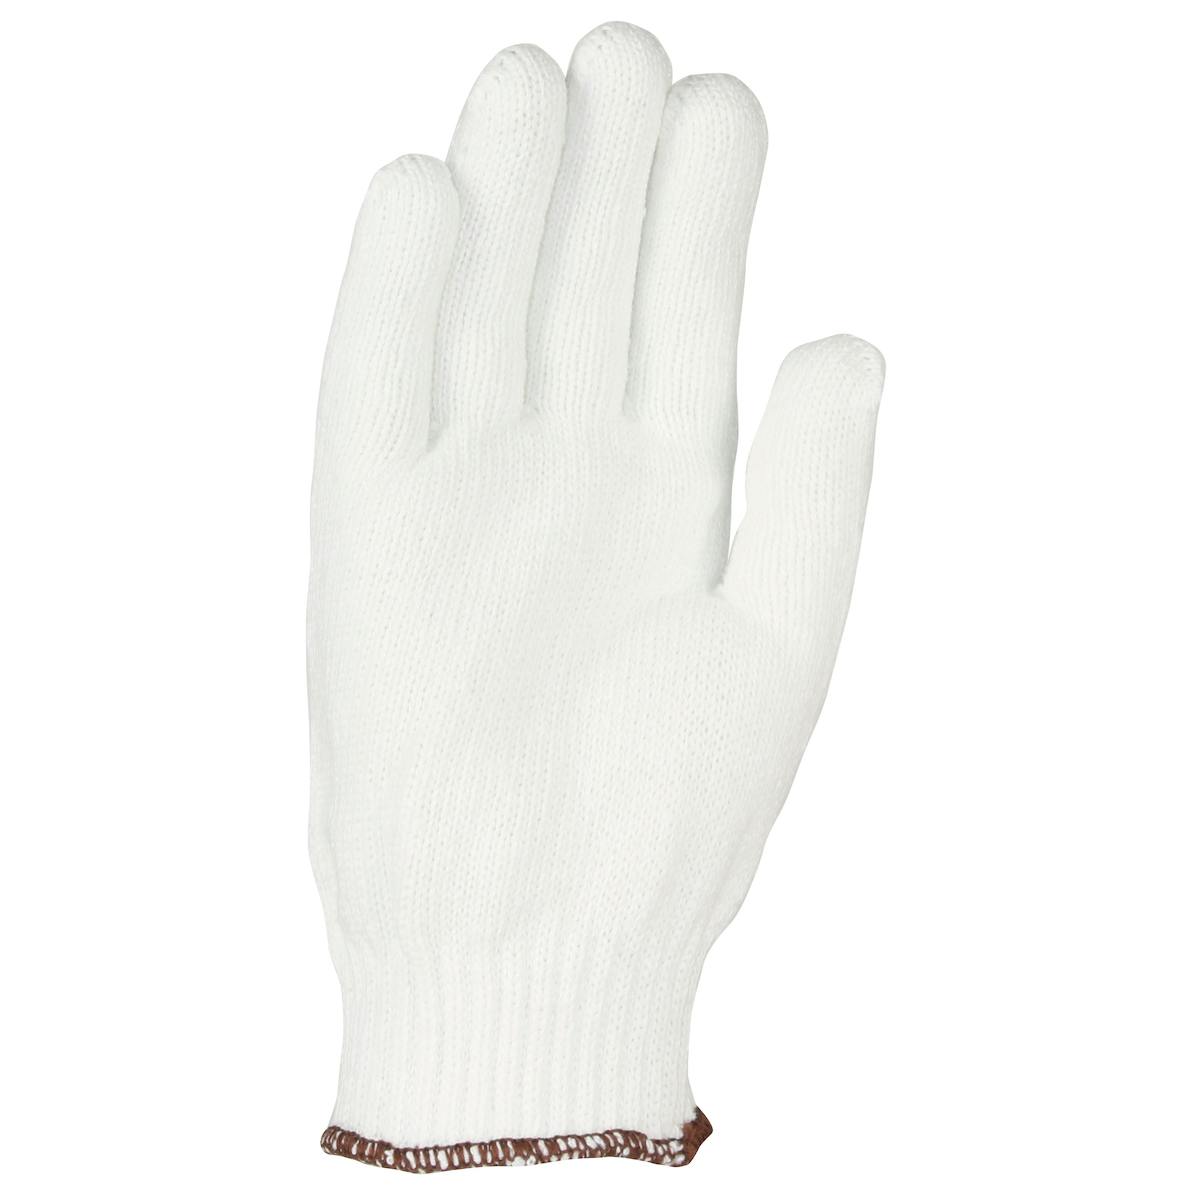 PIP® Seamless Knit Cotton and Polyester Glove - Heavy Weight (MP35)